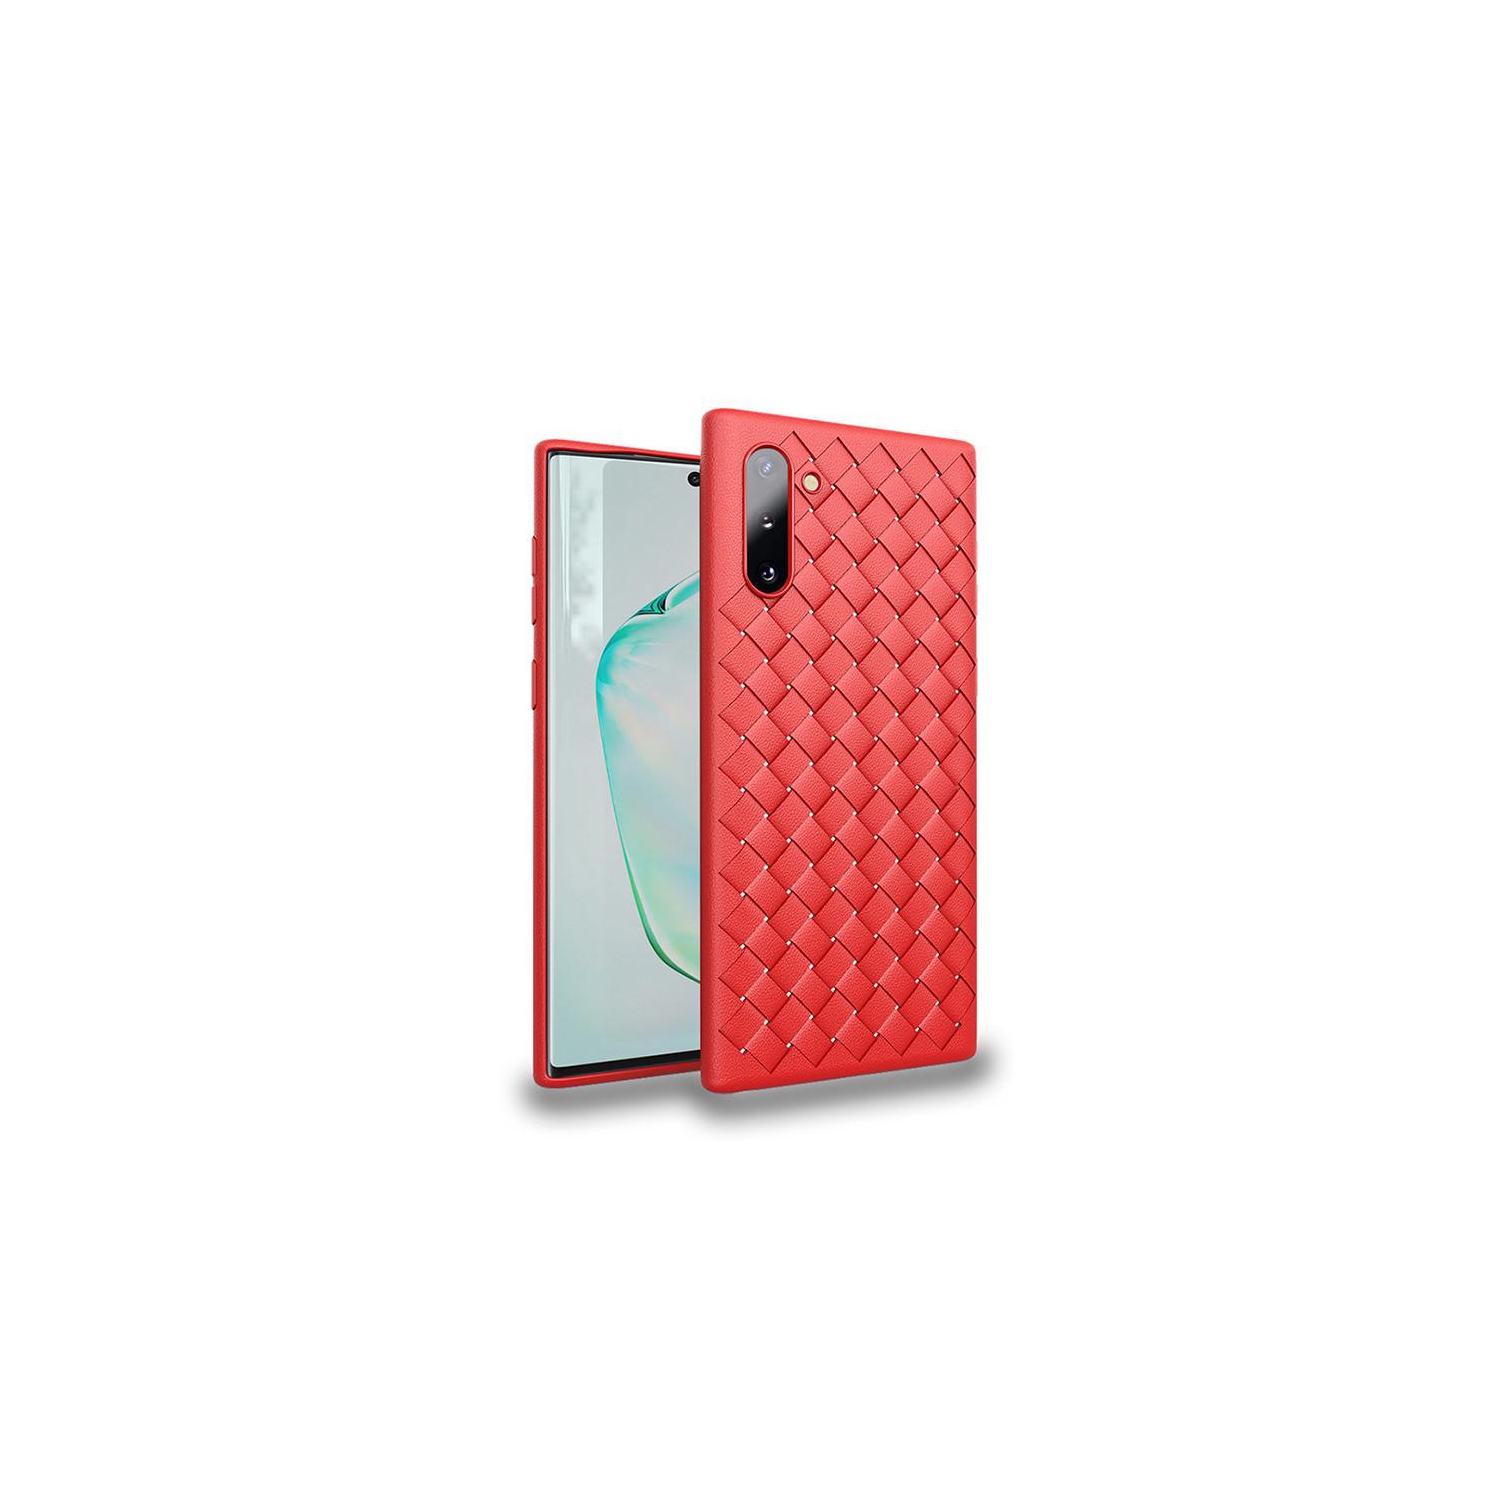 PANDACO Red Leather Cross-Weave Case for Samsung Galaxy Note 10